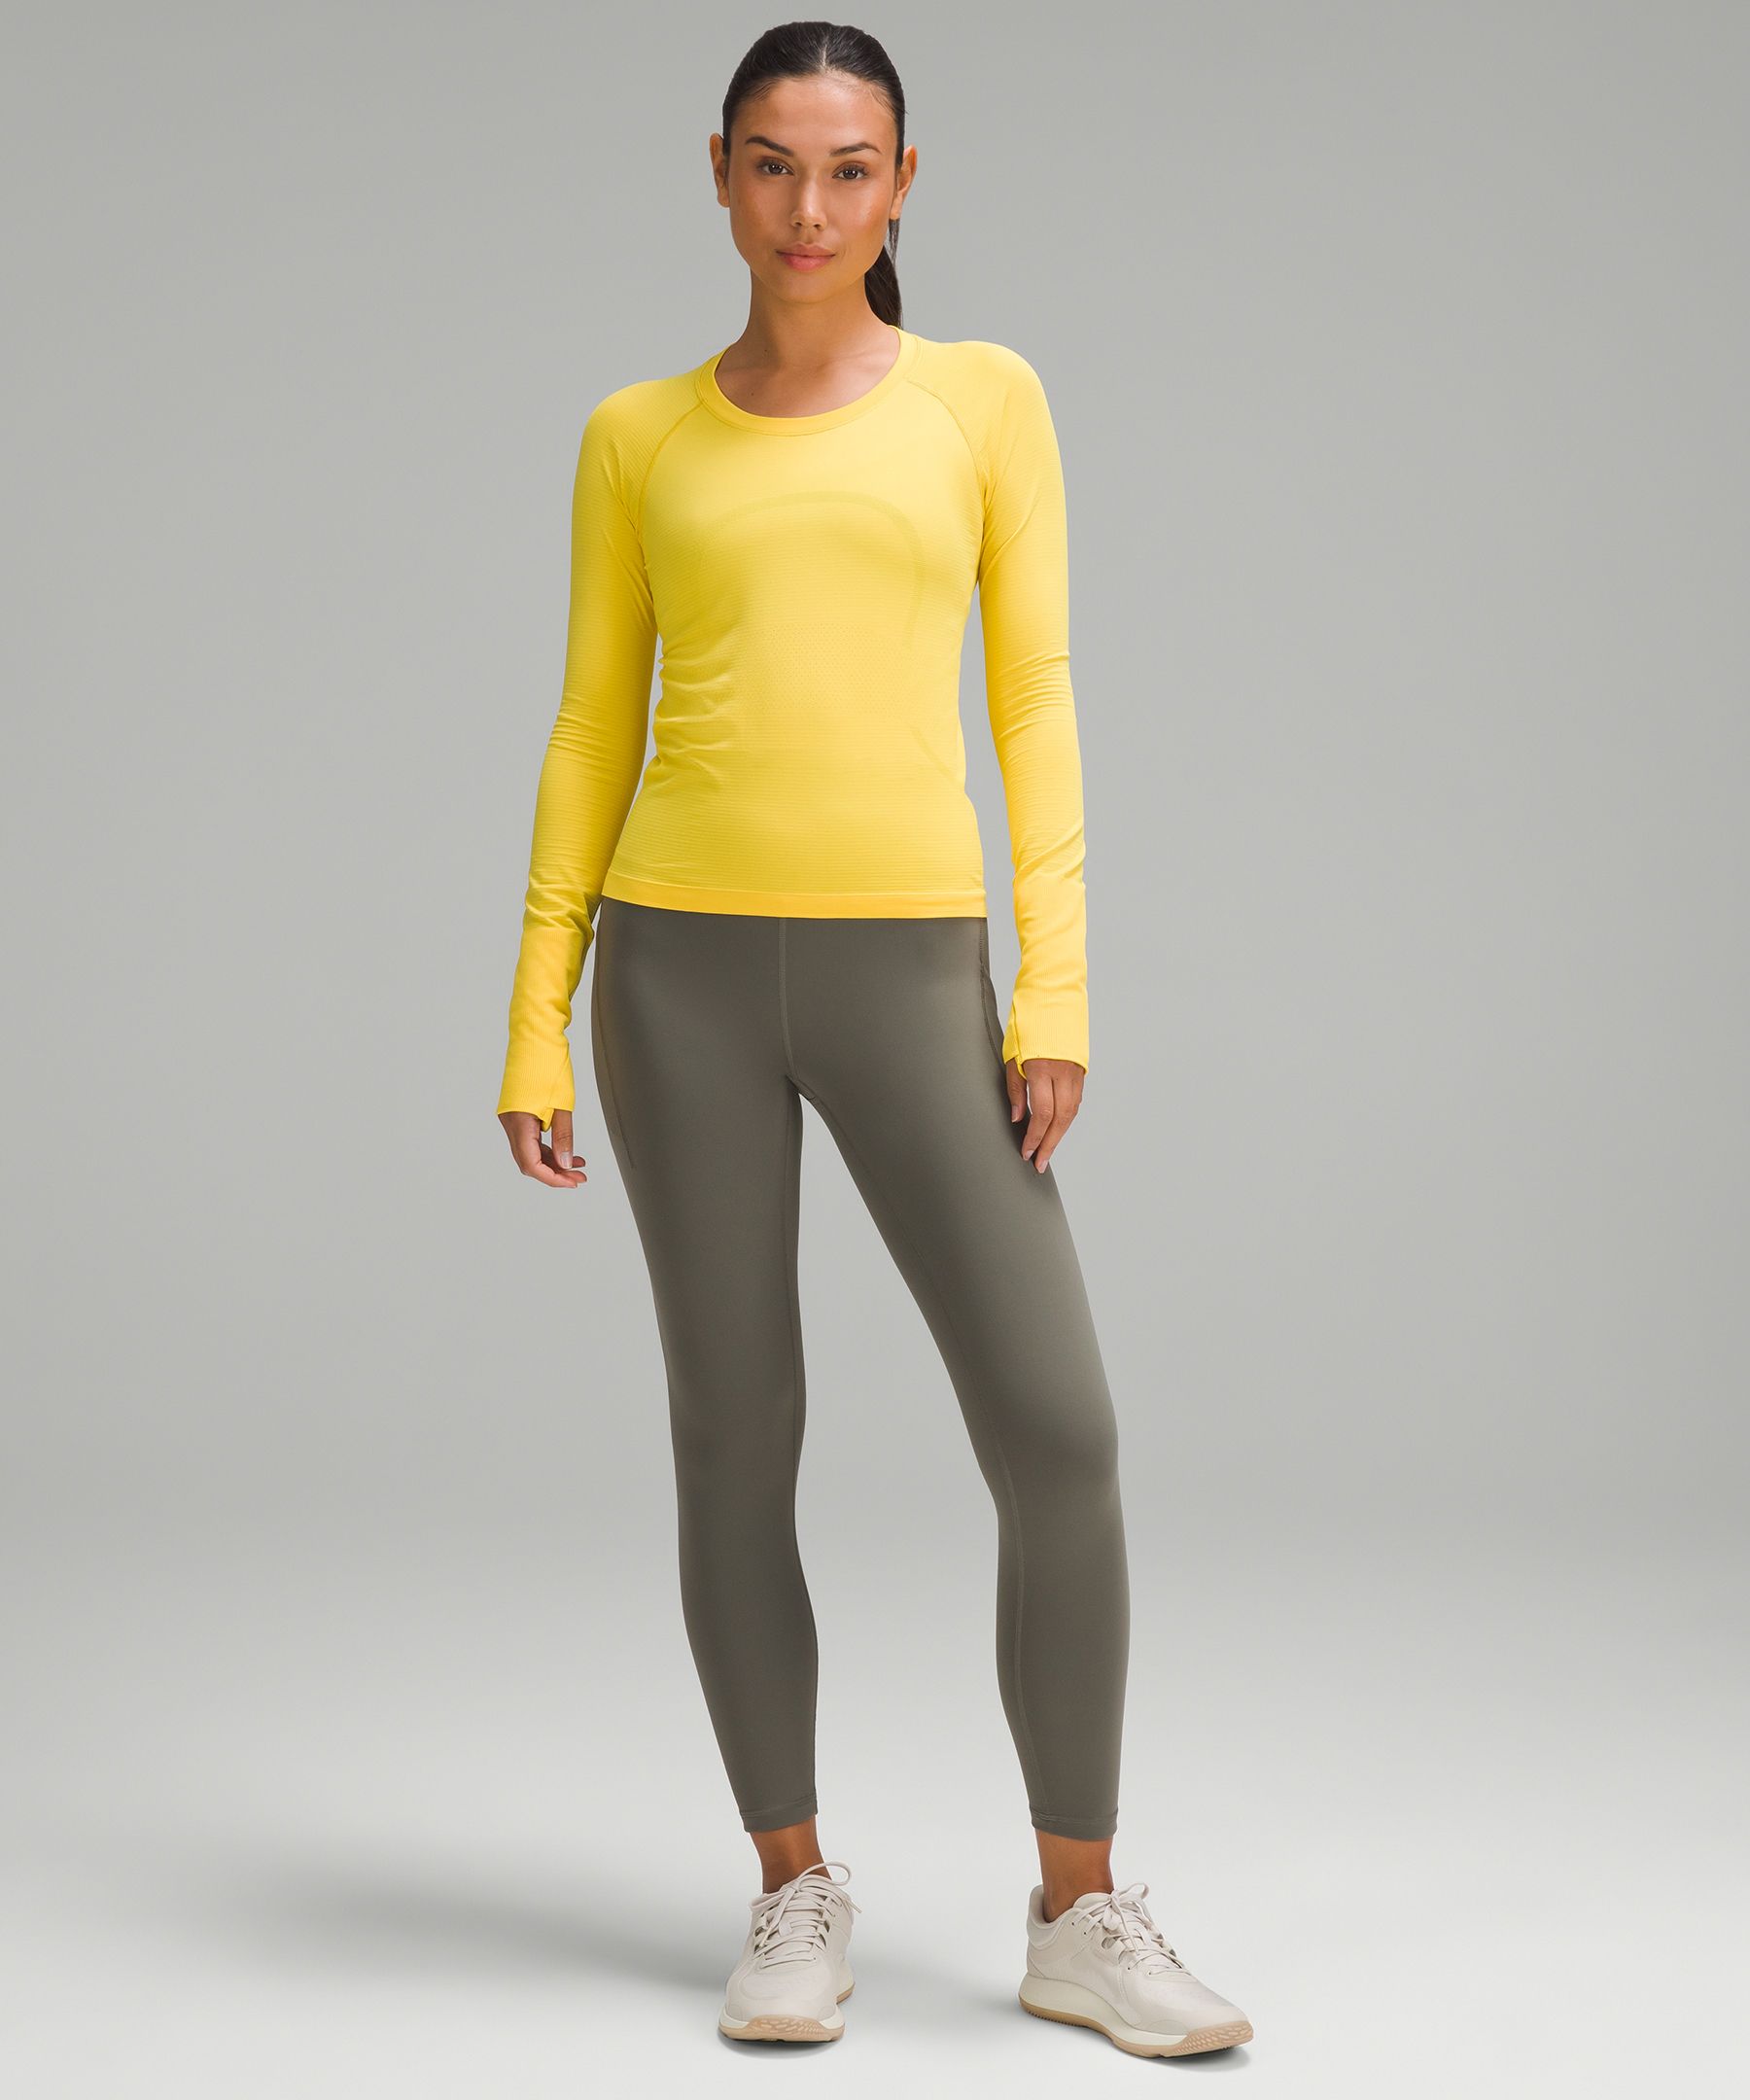 Women's Thermal Clothes